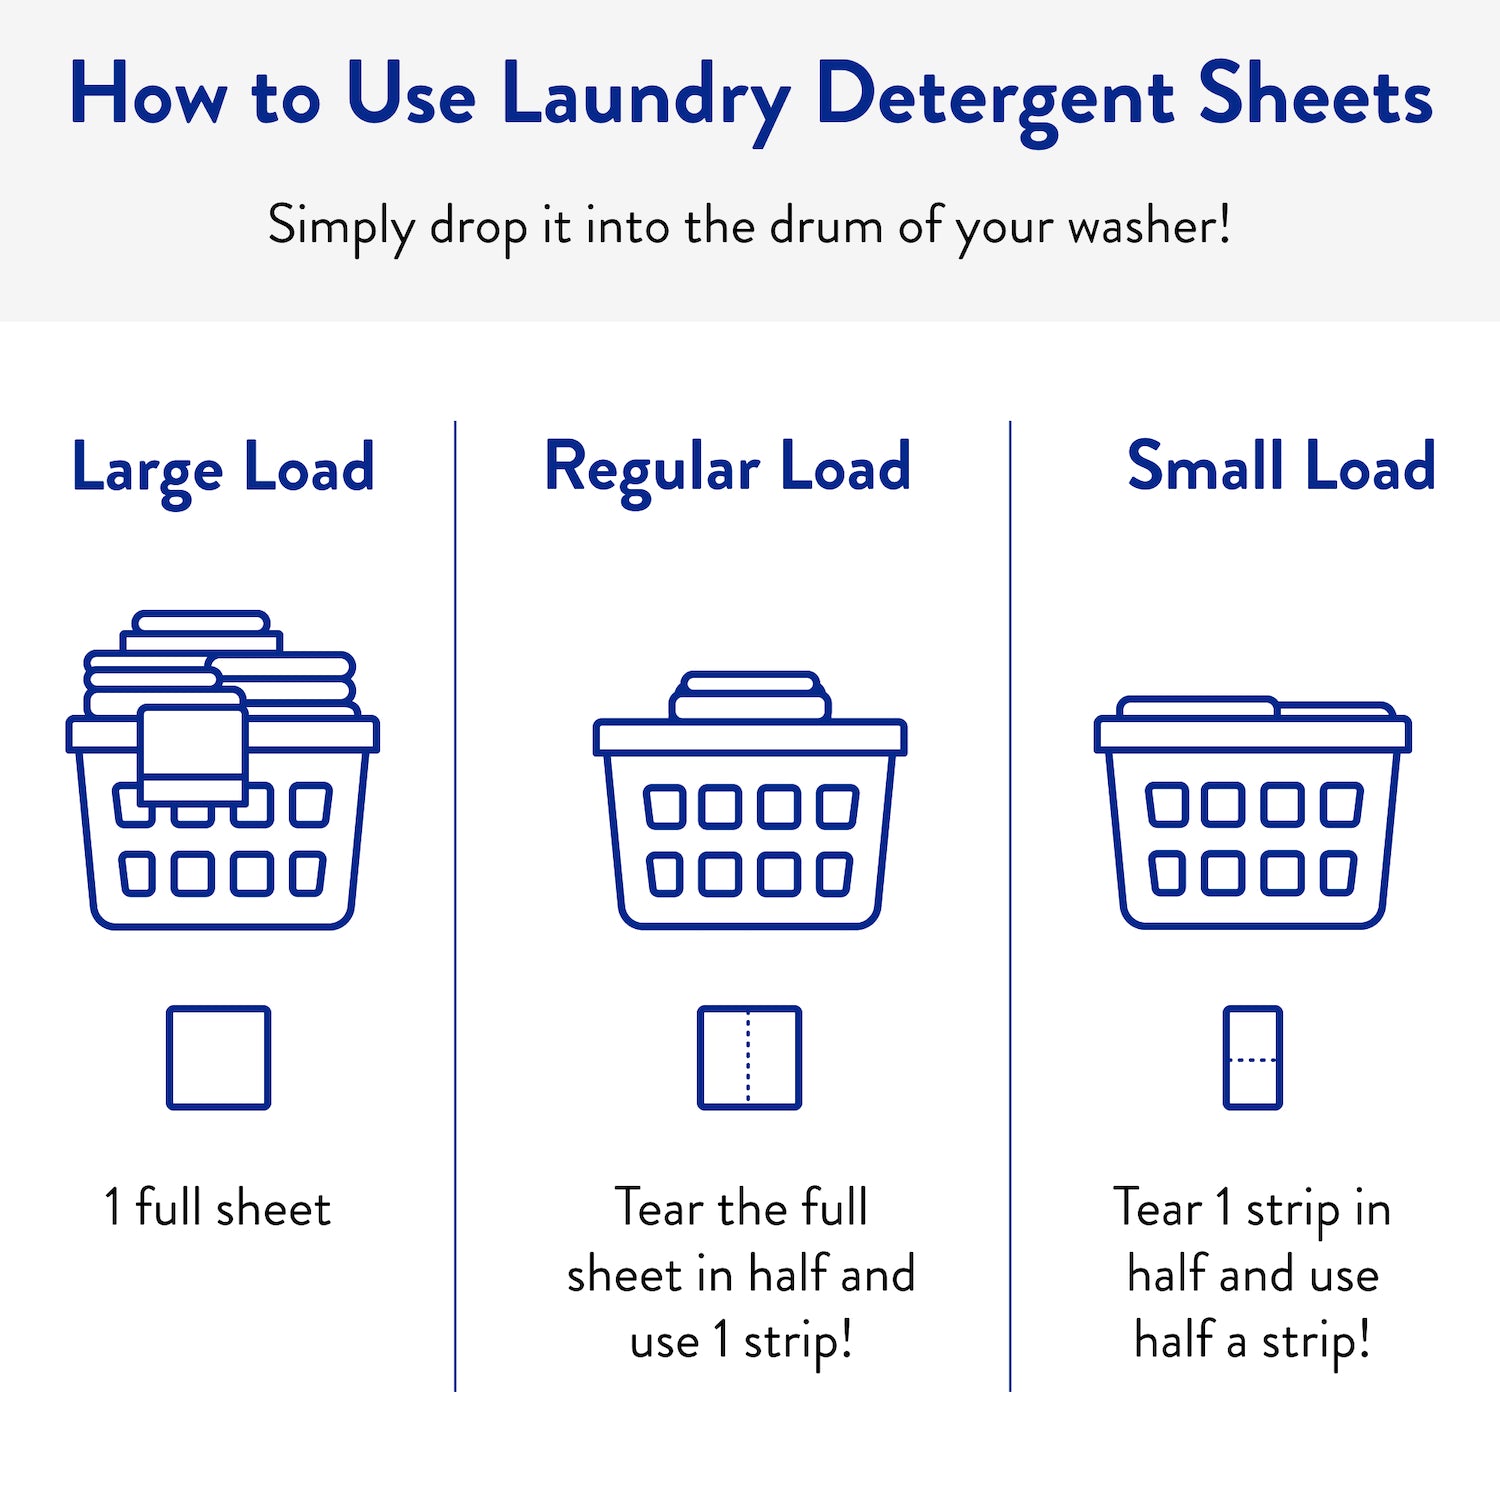 How Do Laundry Sheets Work? - Clean People